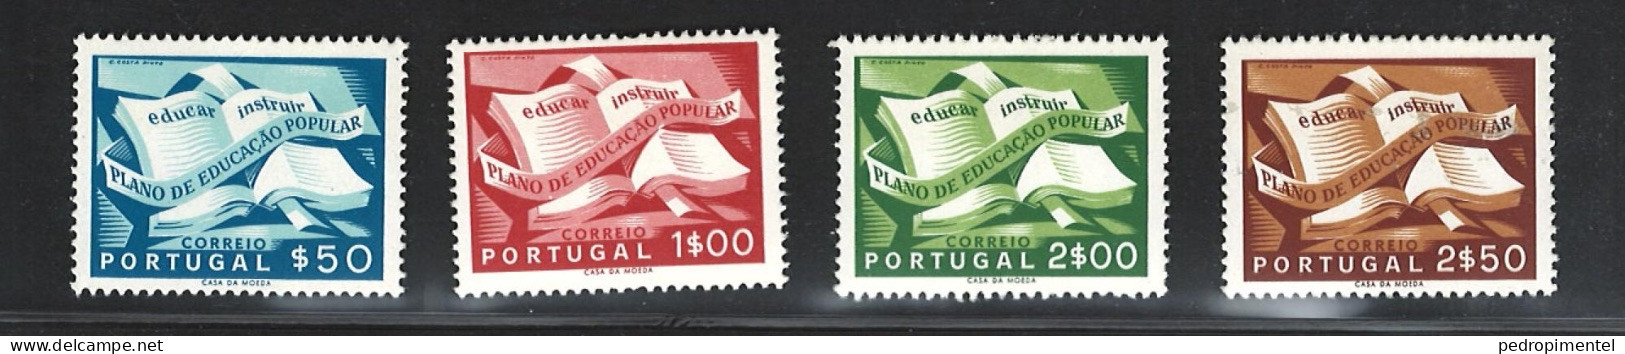 Portugal Stamps 1954 "Popular Education Plan" Condition MNH #796-799 - Neufs